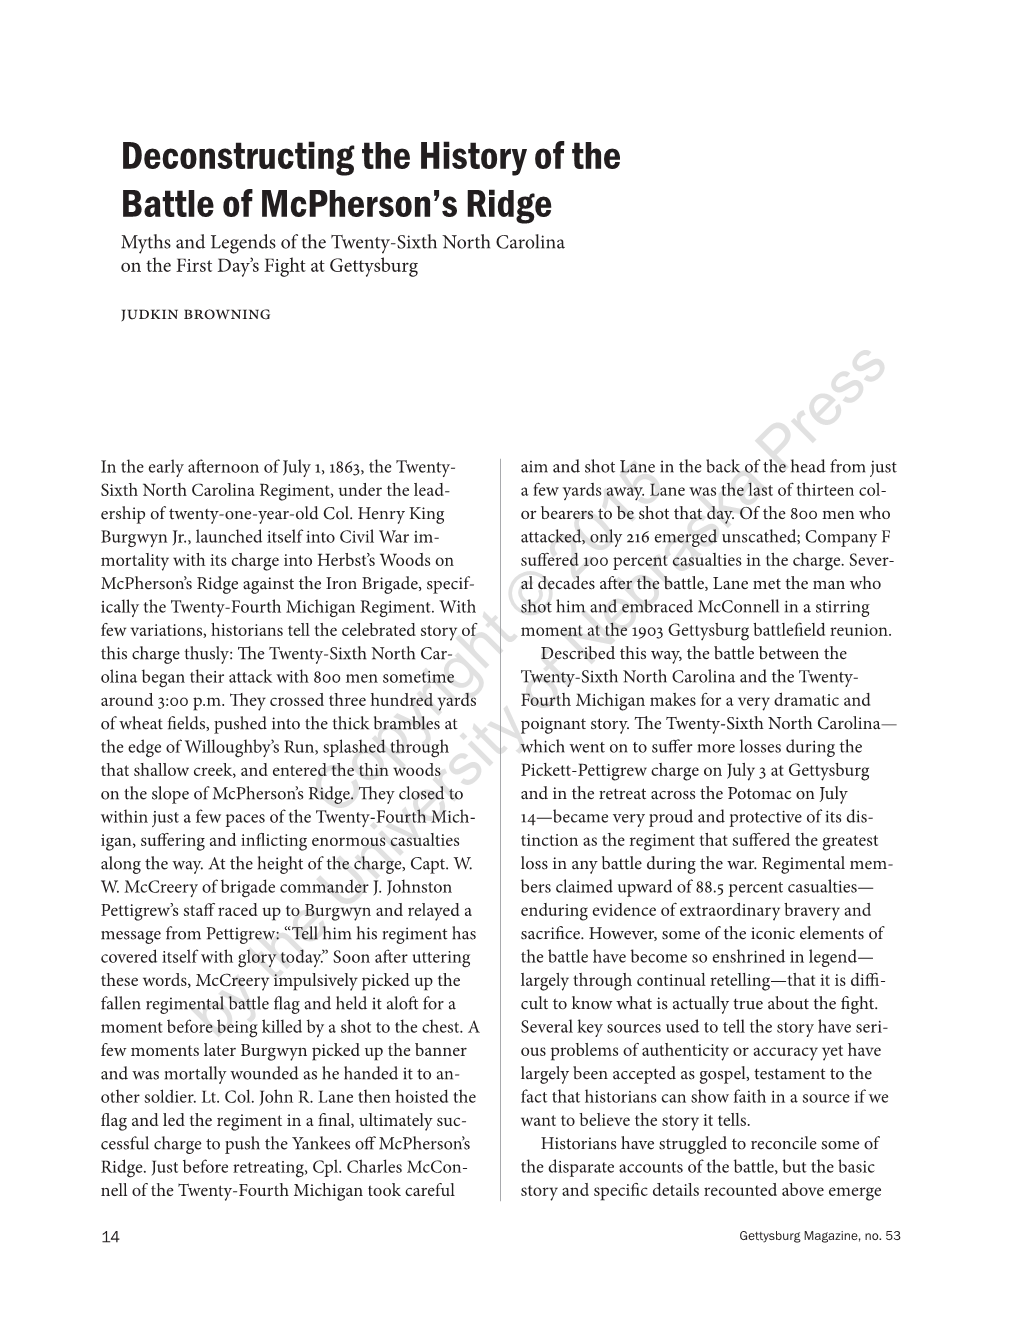 Deconstructing the History of the Battle of The